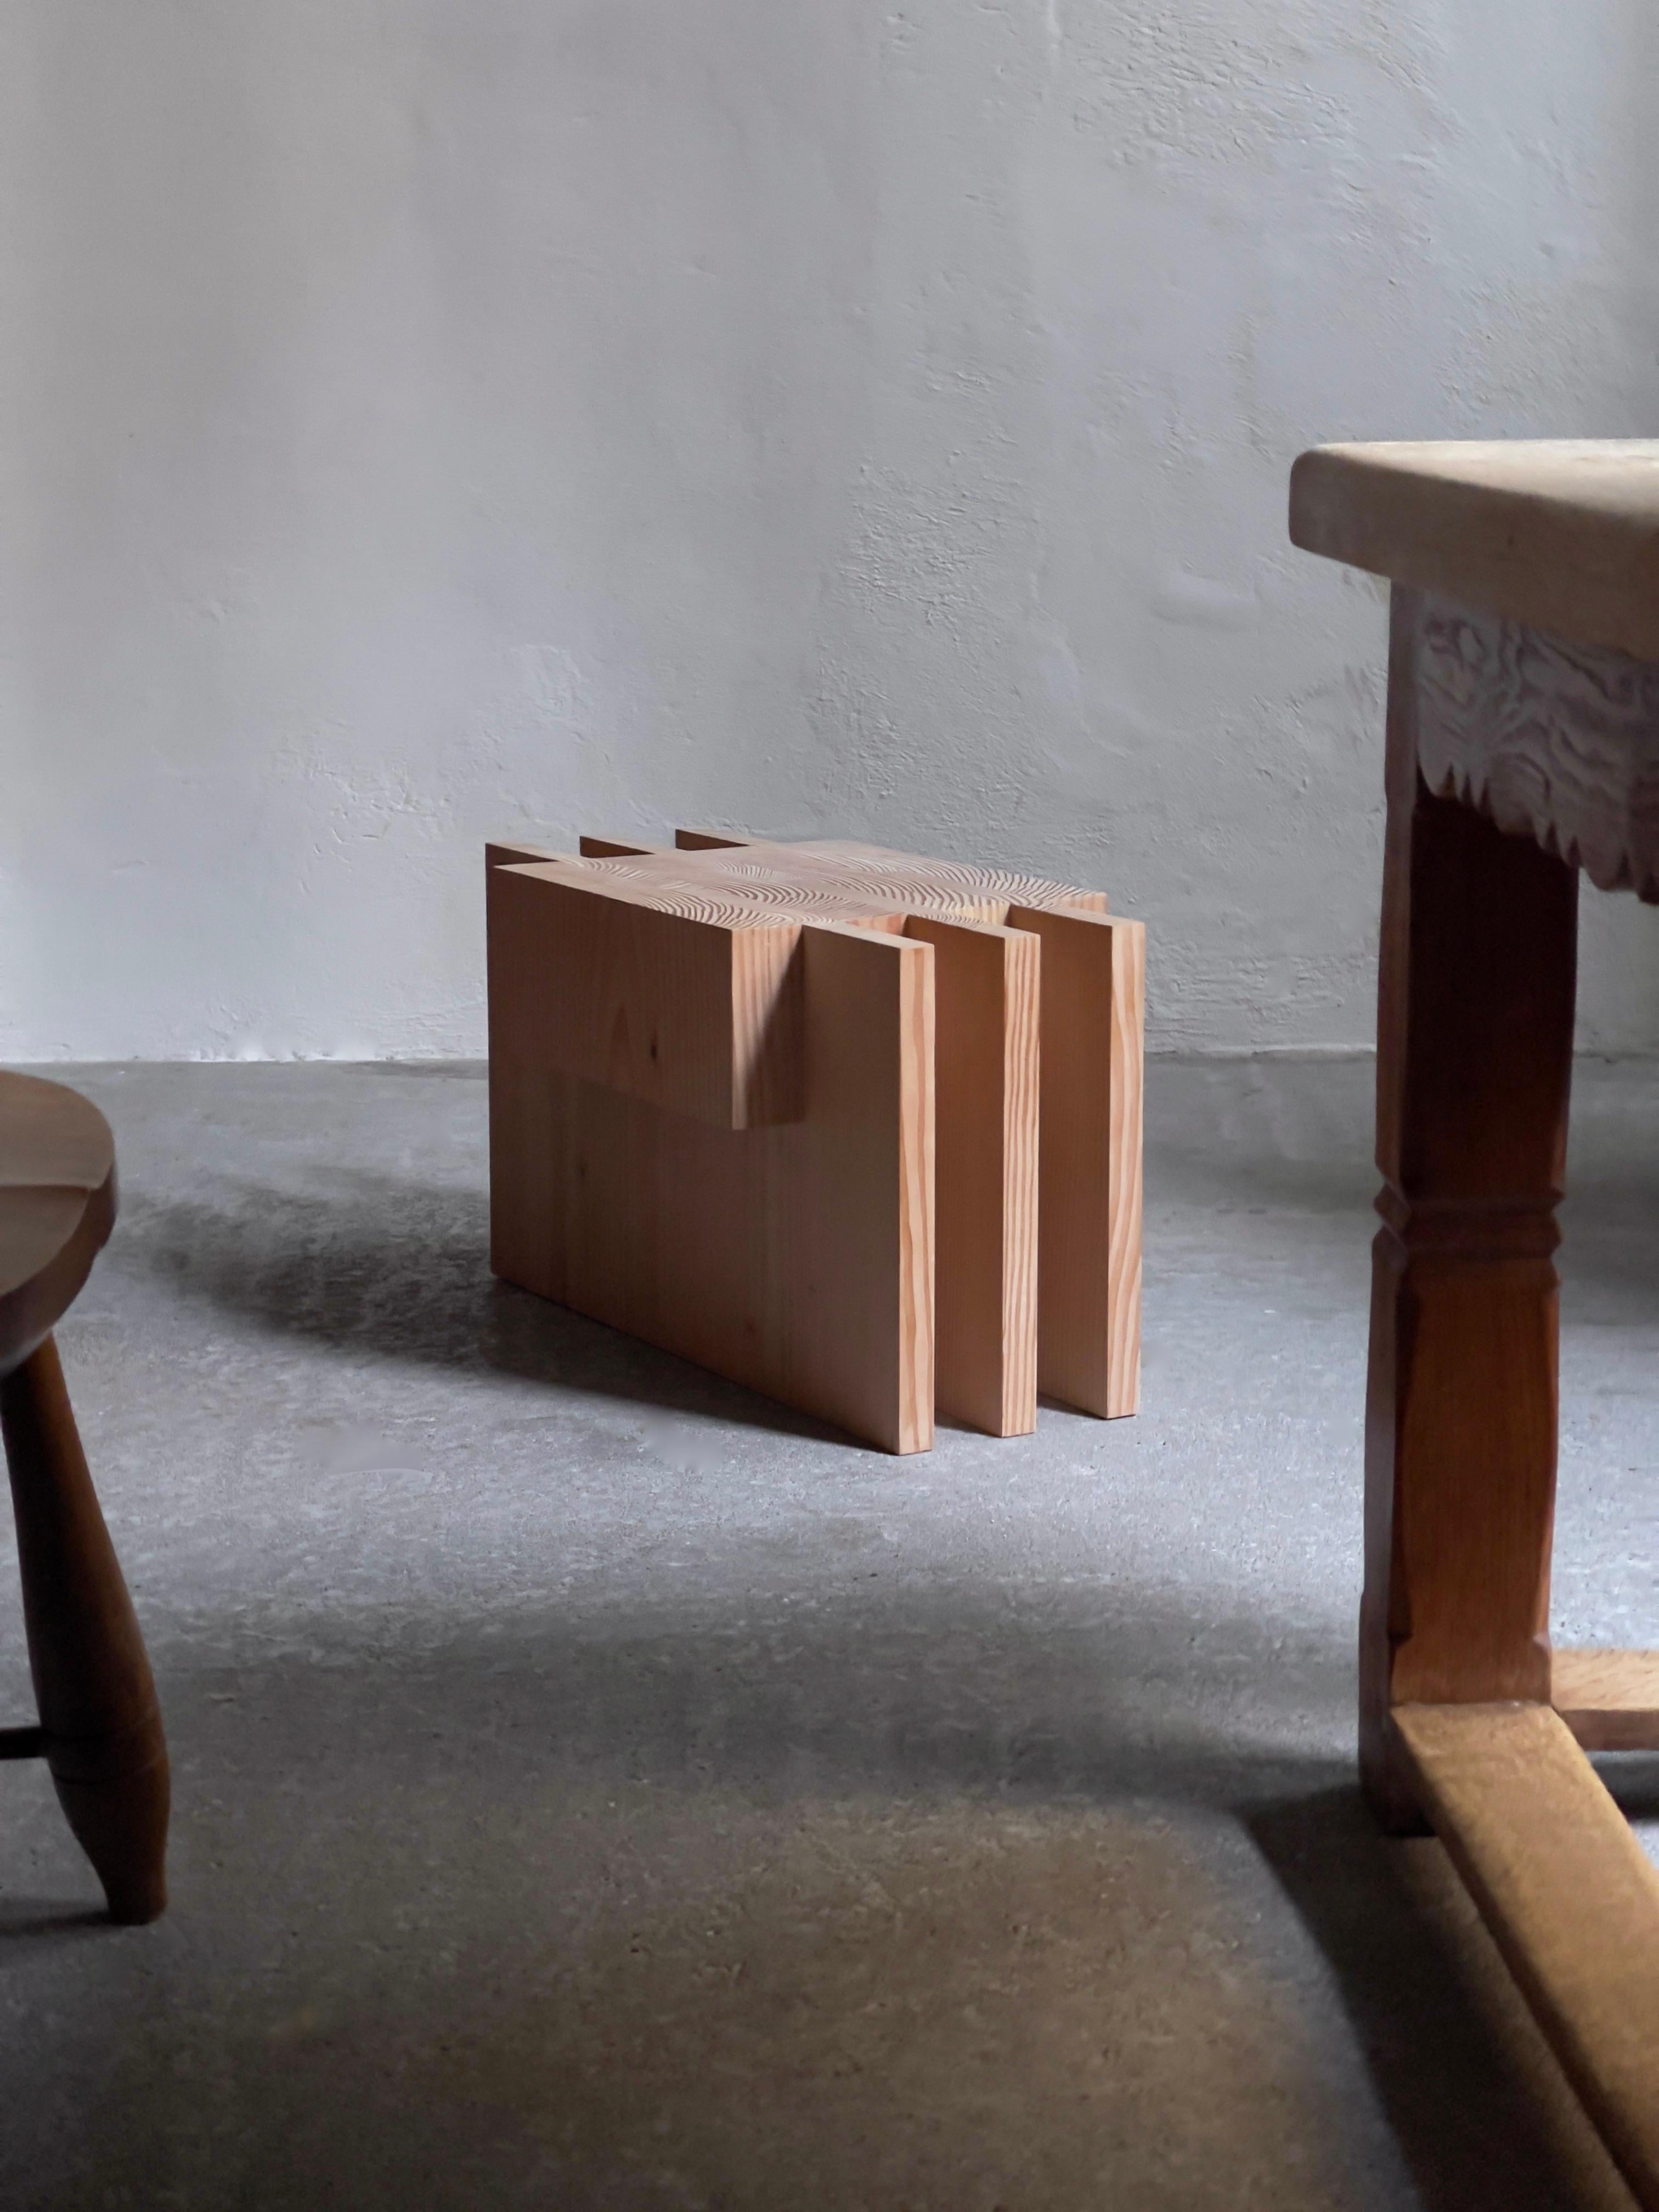 Danish Contemporary object Stool Table Made Entirely from Industrial Pine Wood Offcuts For Sale